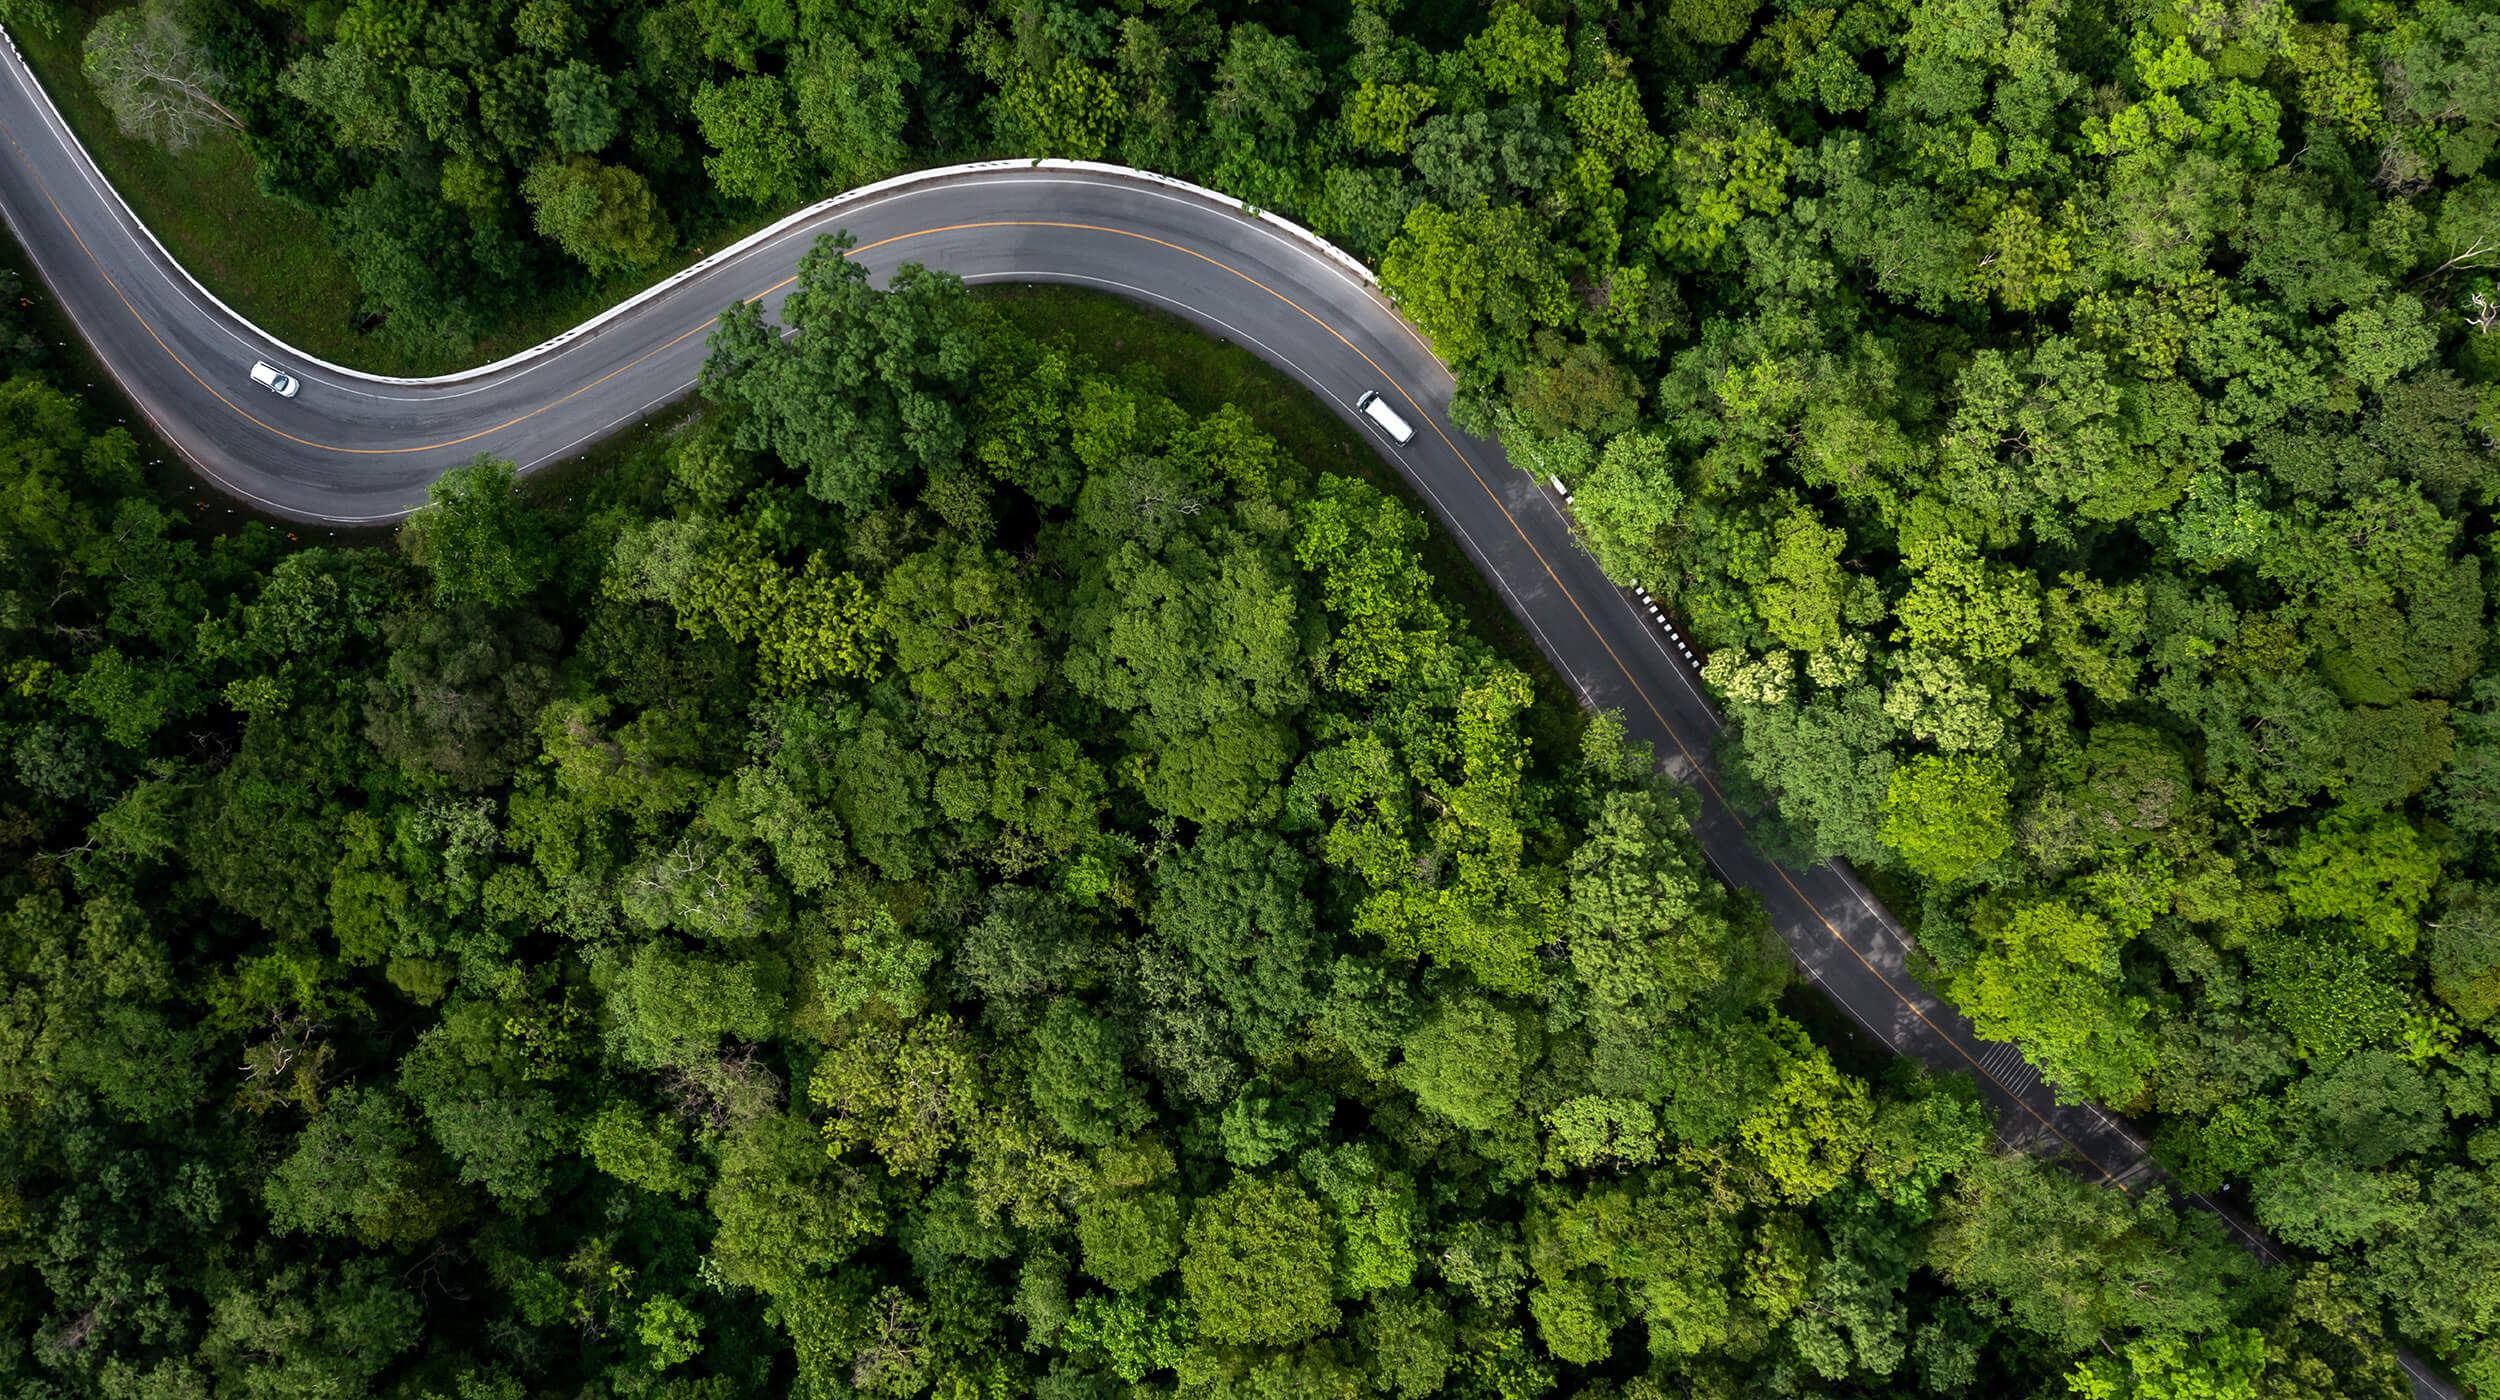 Bird's eye view of cars driving on a bendy road through a surrounding green forest of trees